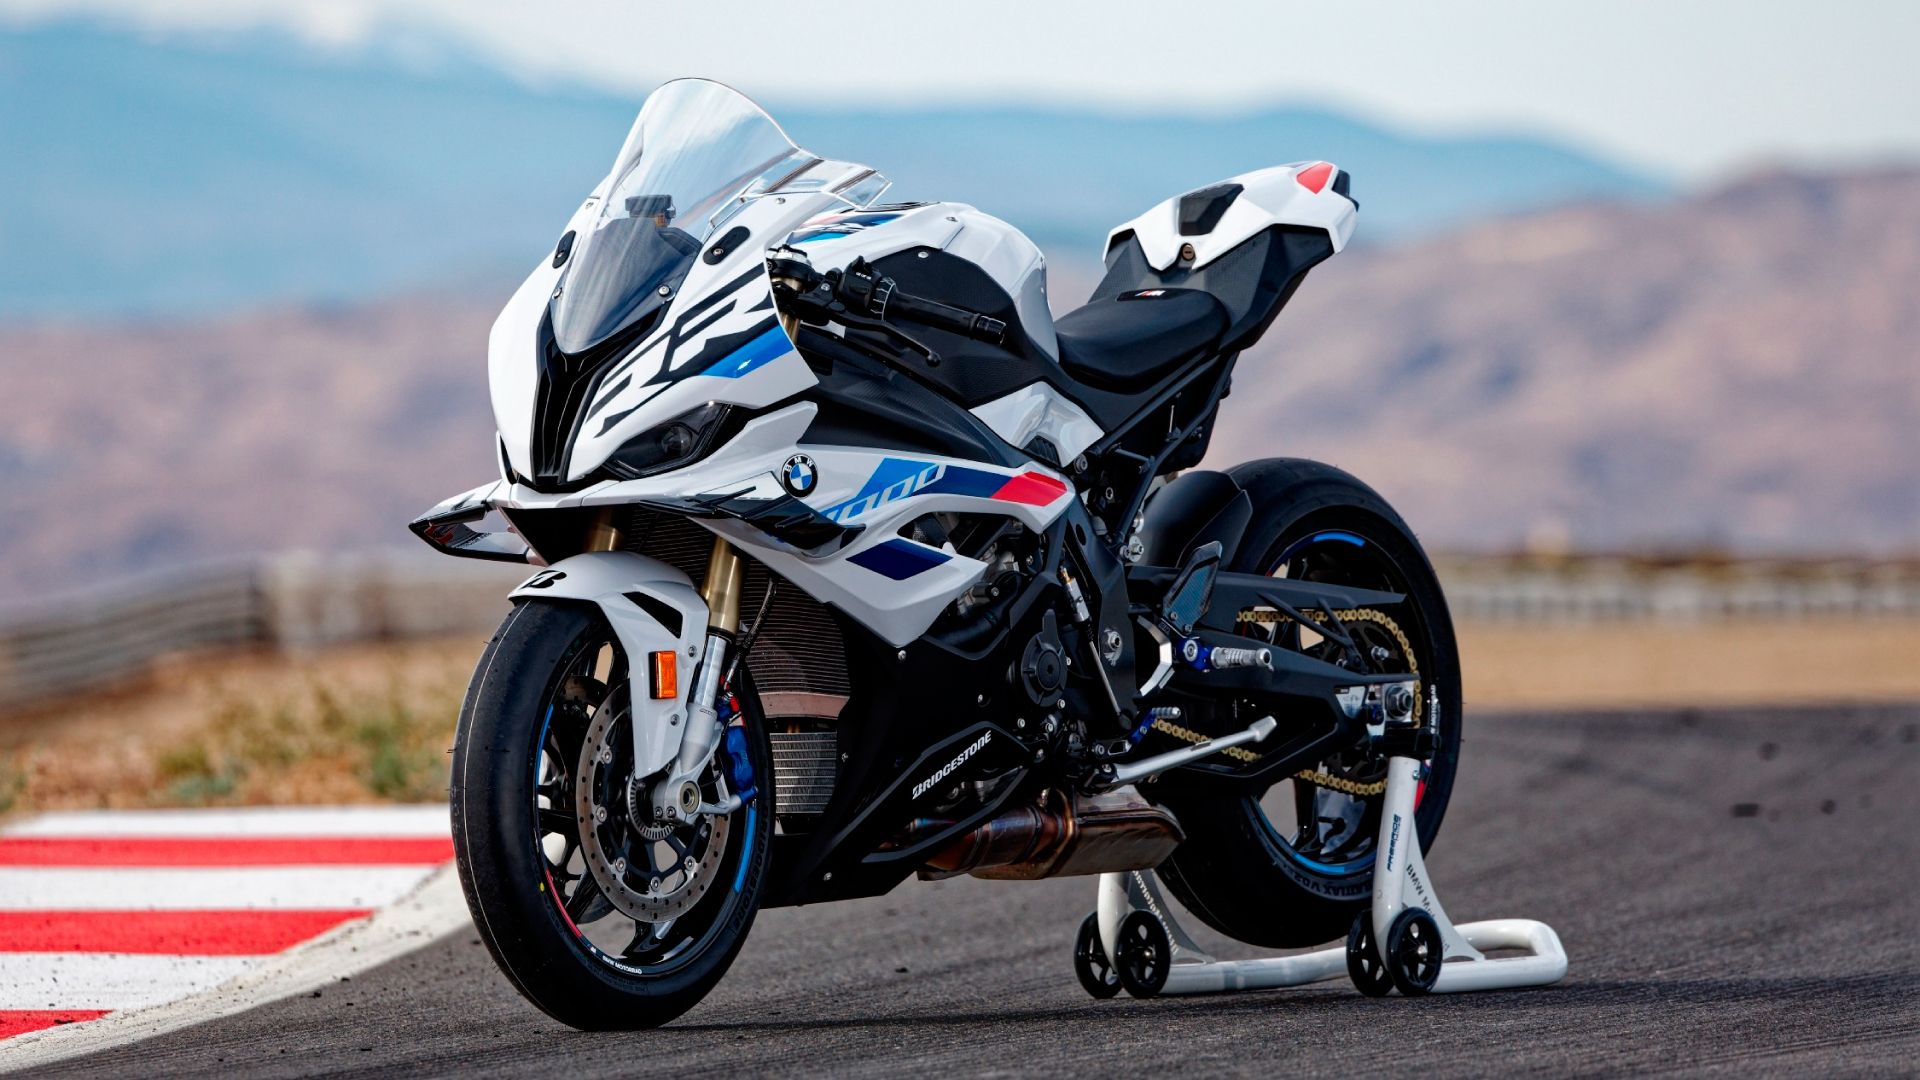 BMW S 1000 RR on the centerstand